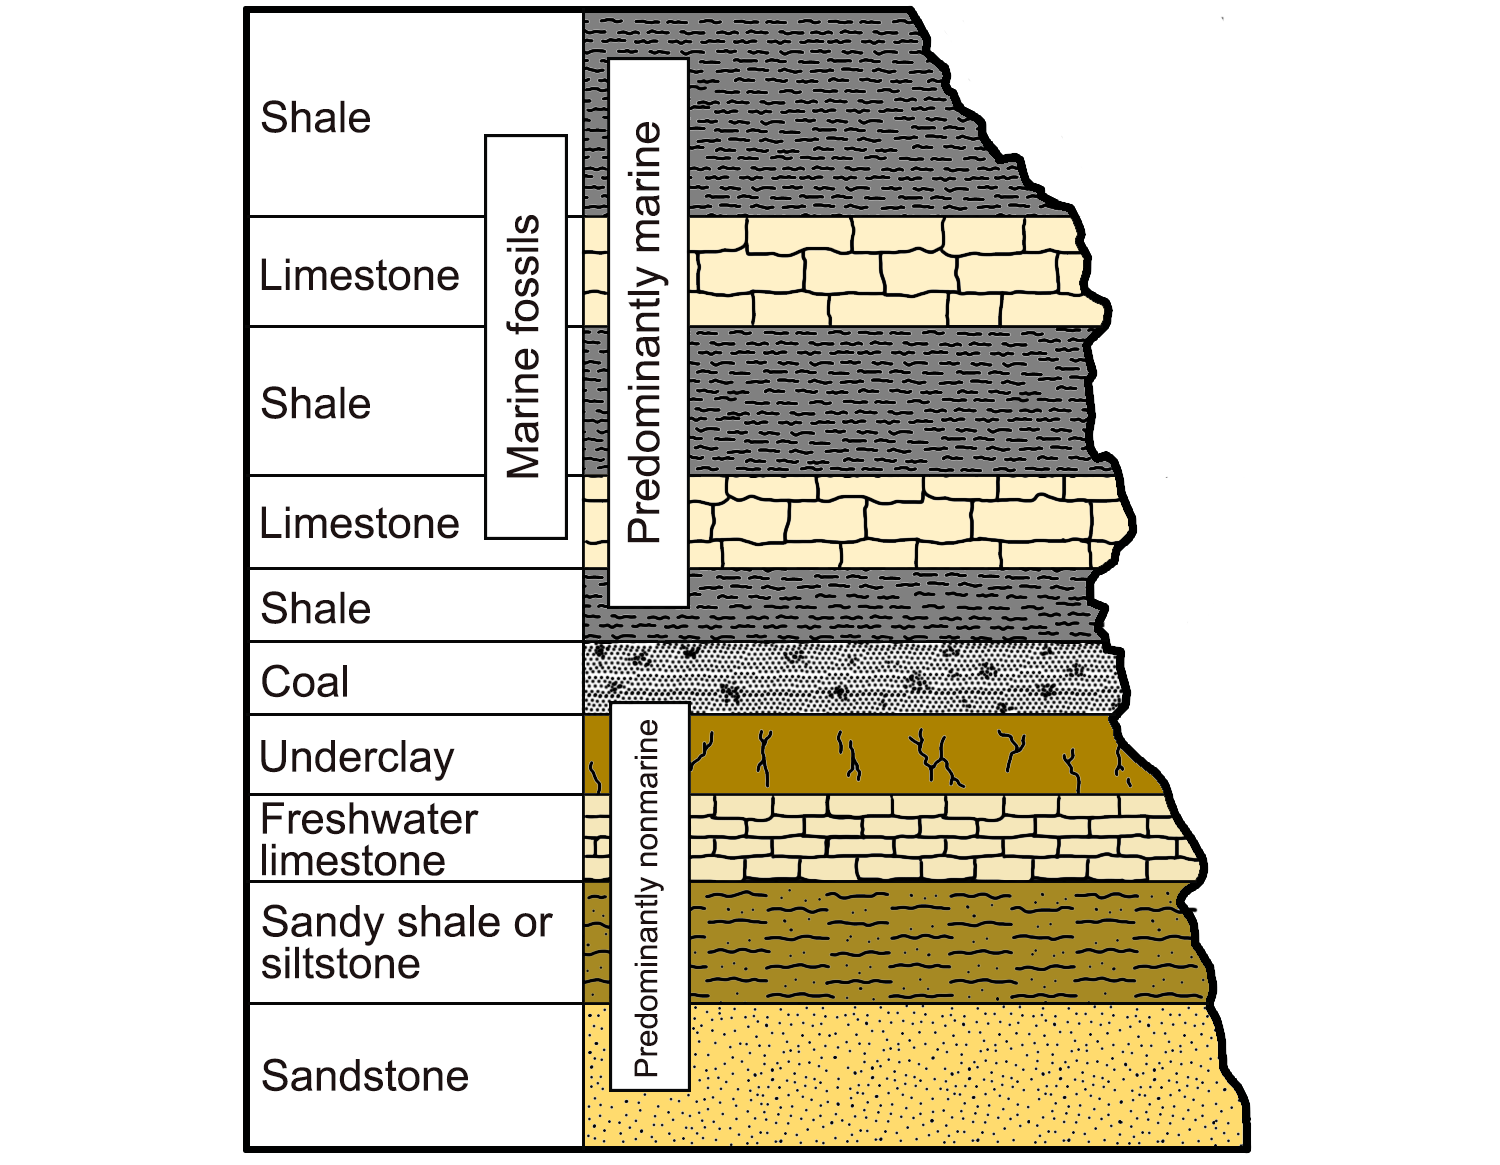 Simplified diagram depicting a typical cyclothem sequence of sedimentary rocks.